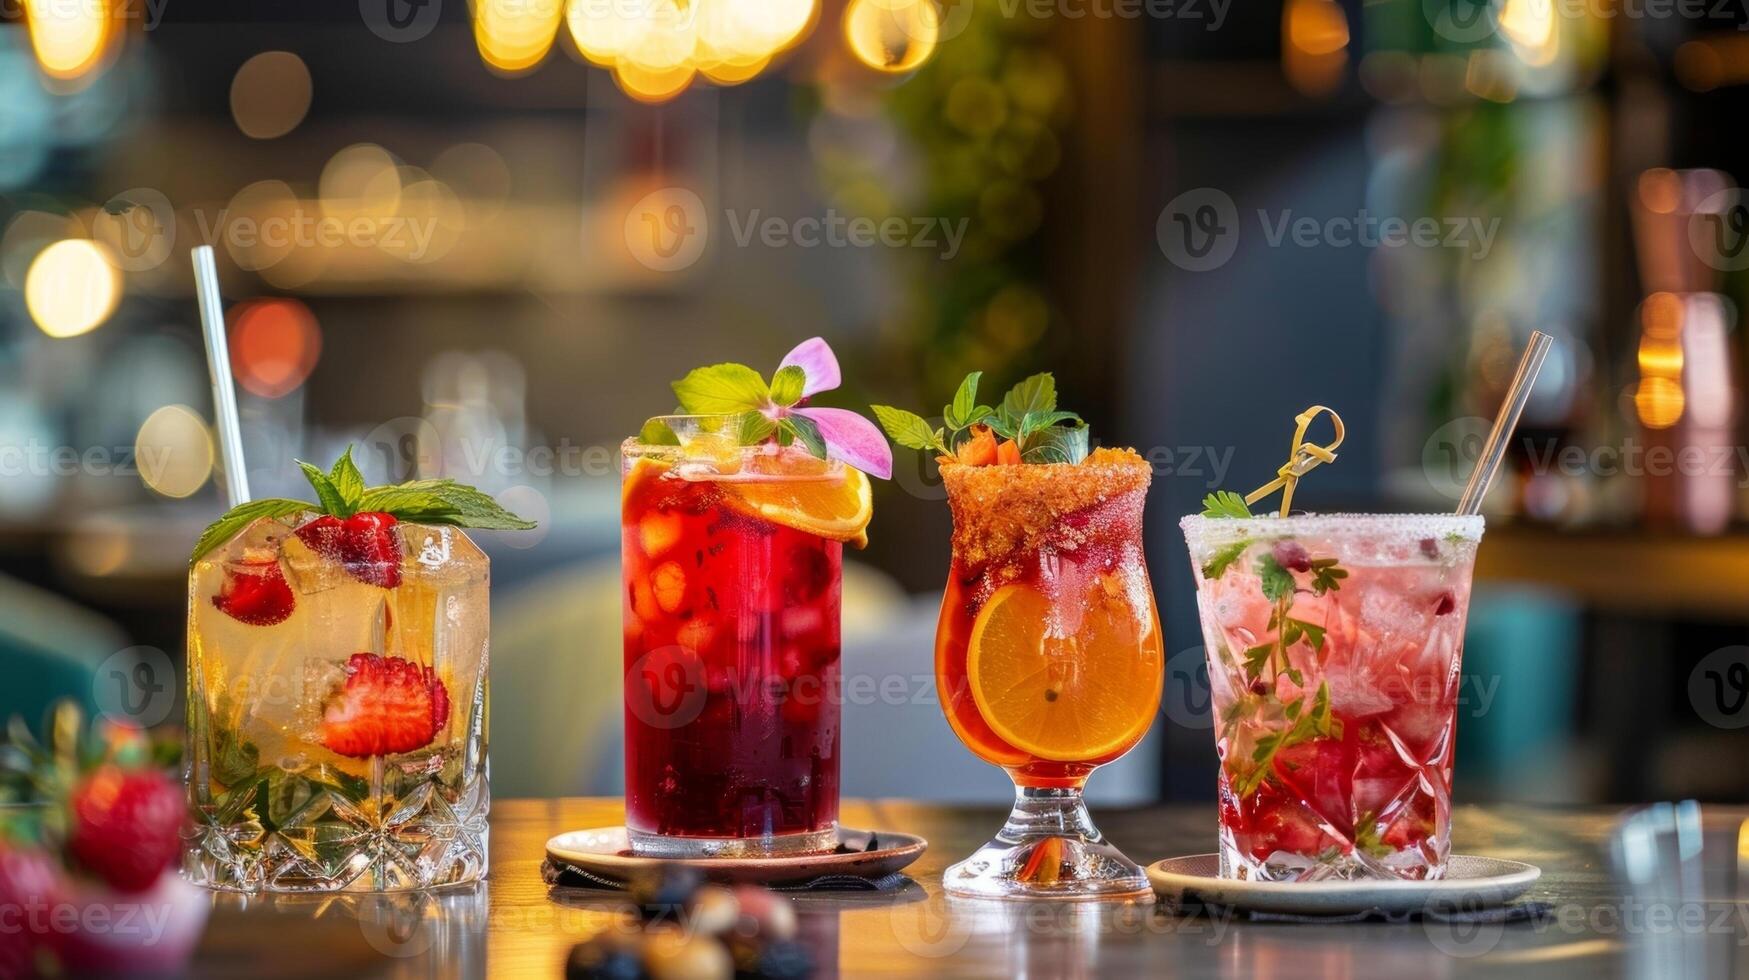 The popup bars menu boasts a variety of intriguing and unique alcoholfree drinks such as a fruity tea infusion and a y ginger mocktail photo